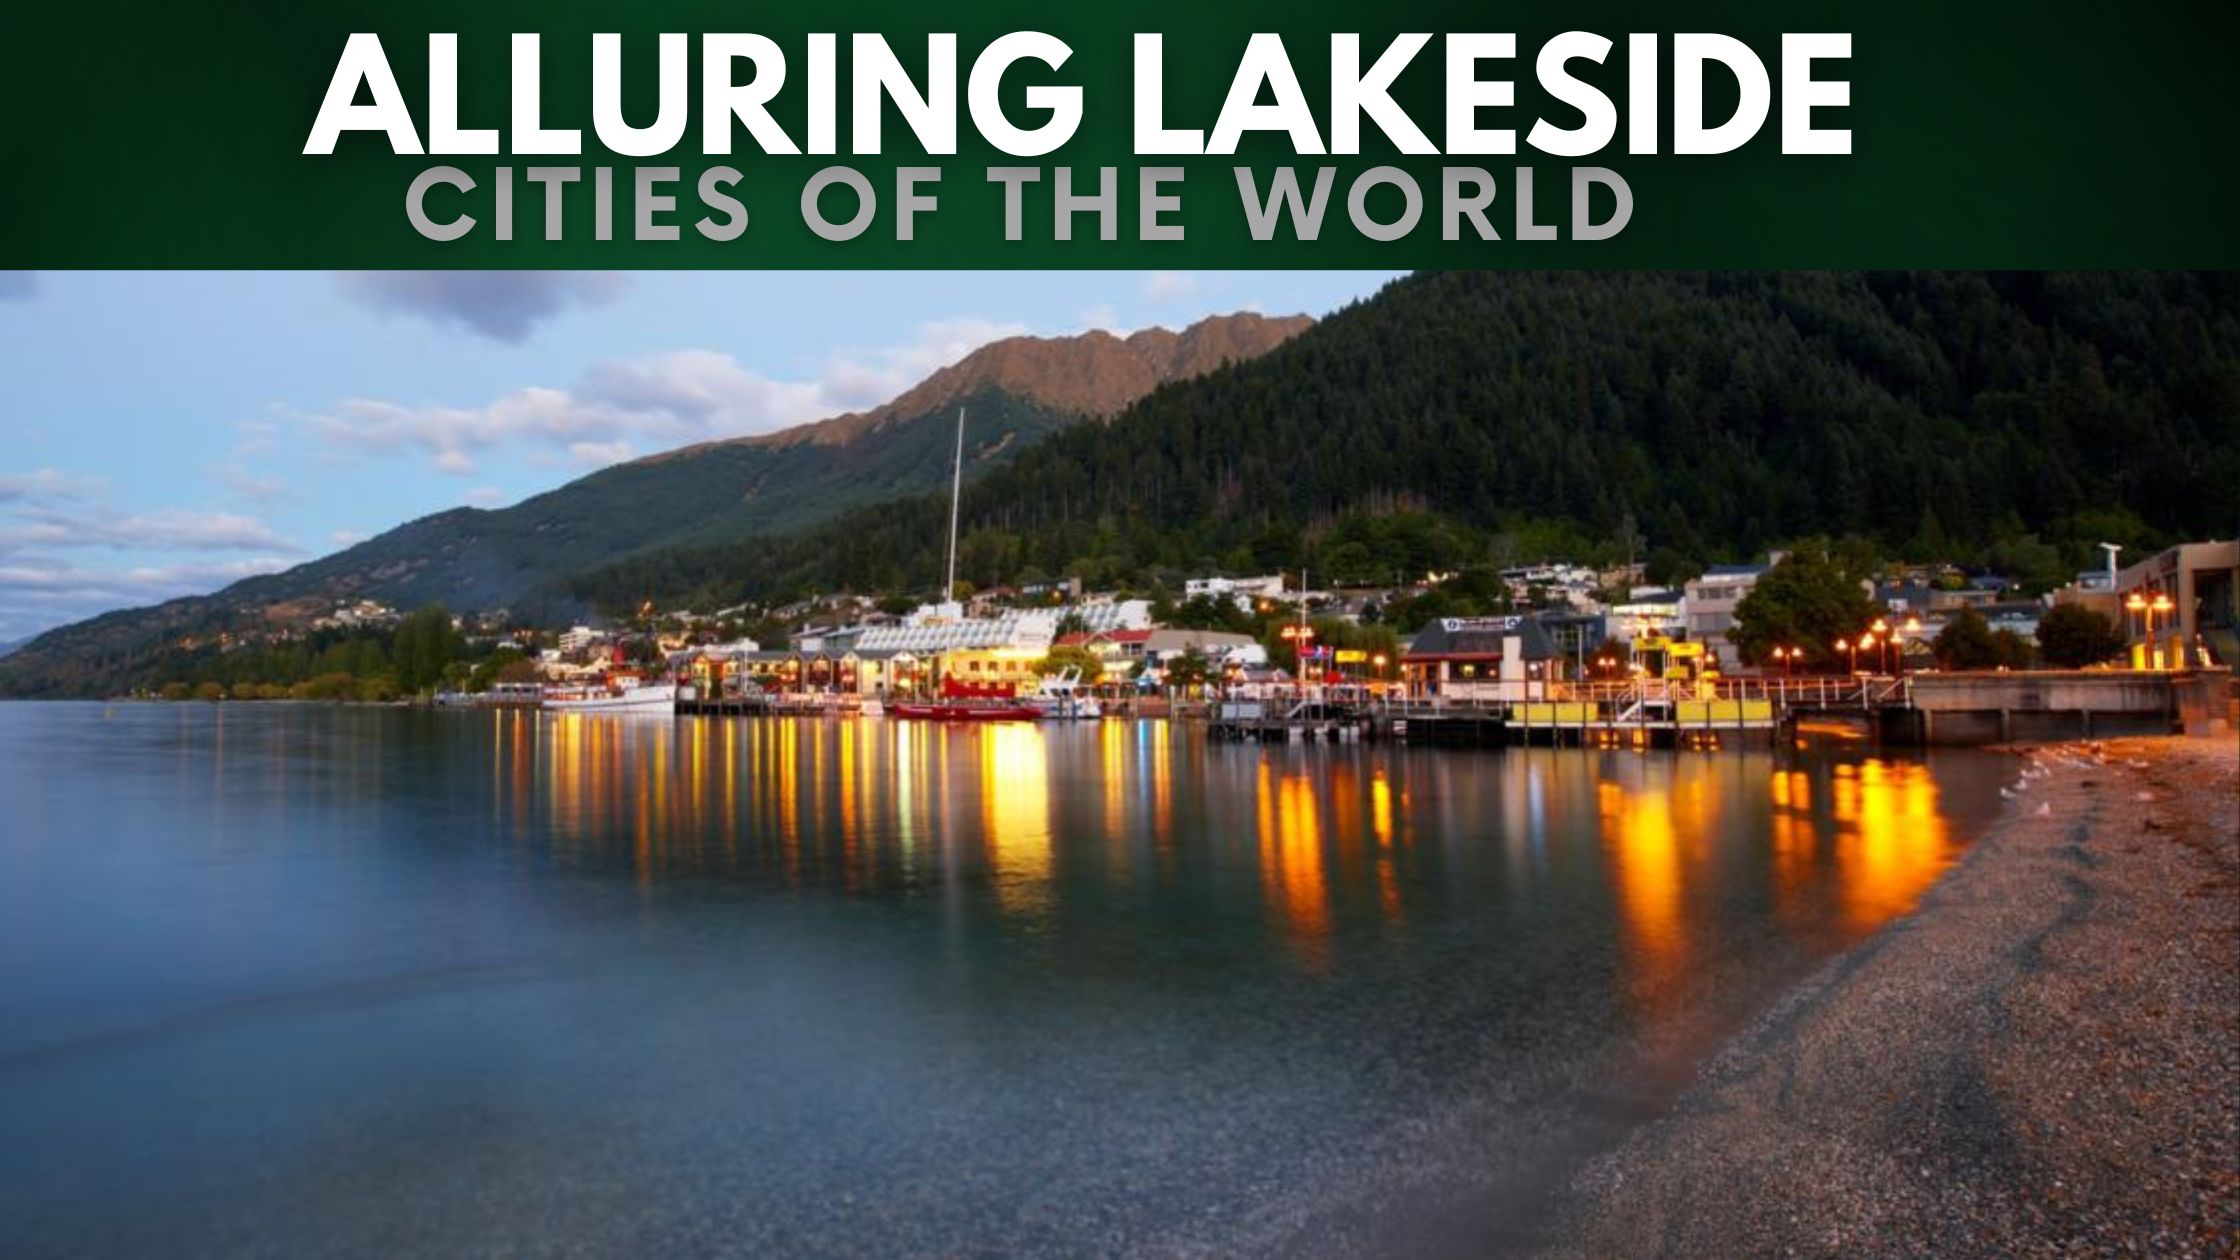 7 Alluring Lakeside Cities Of The World